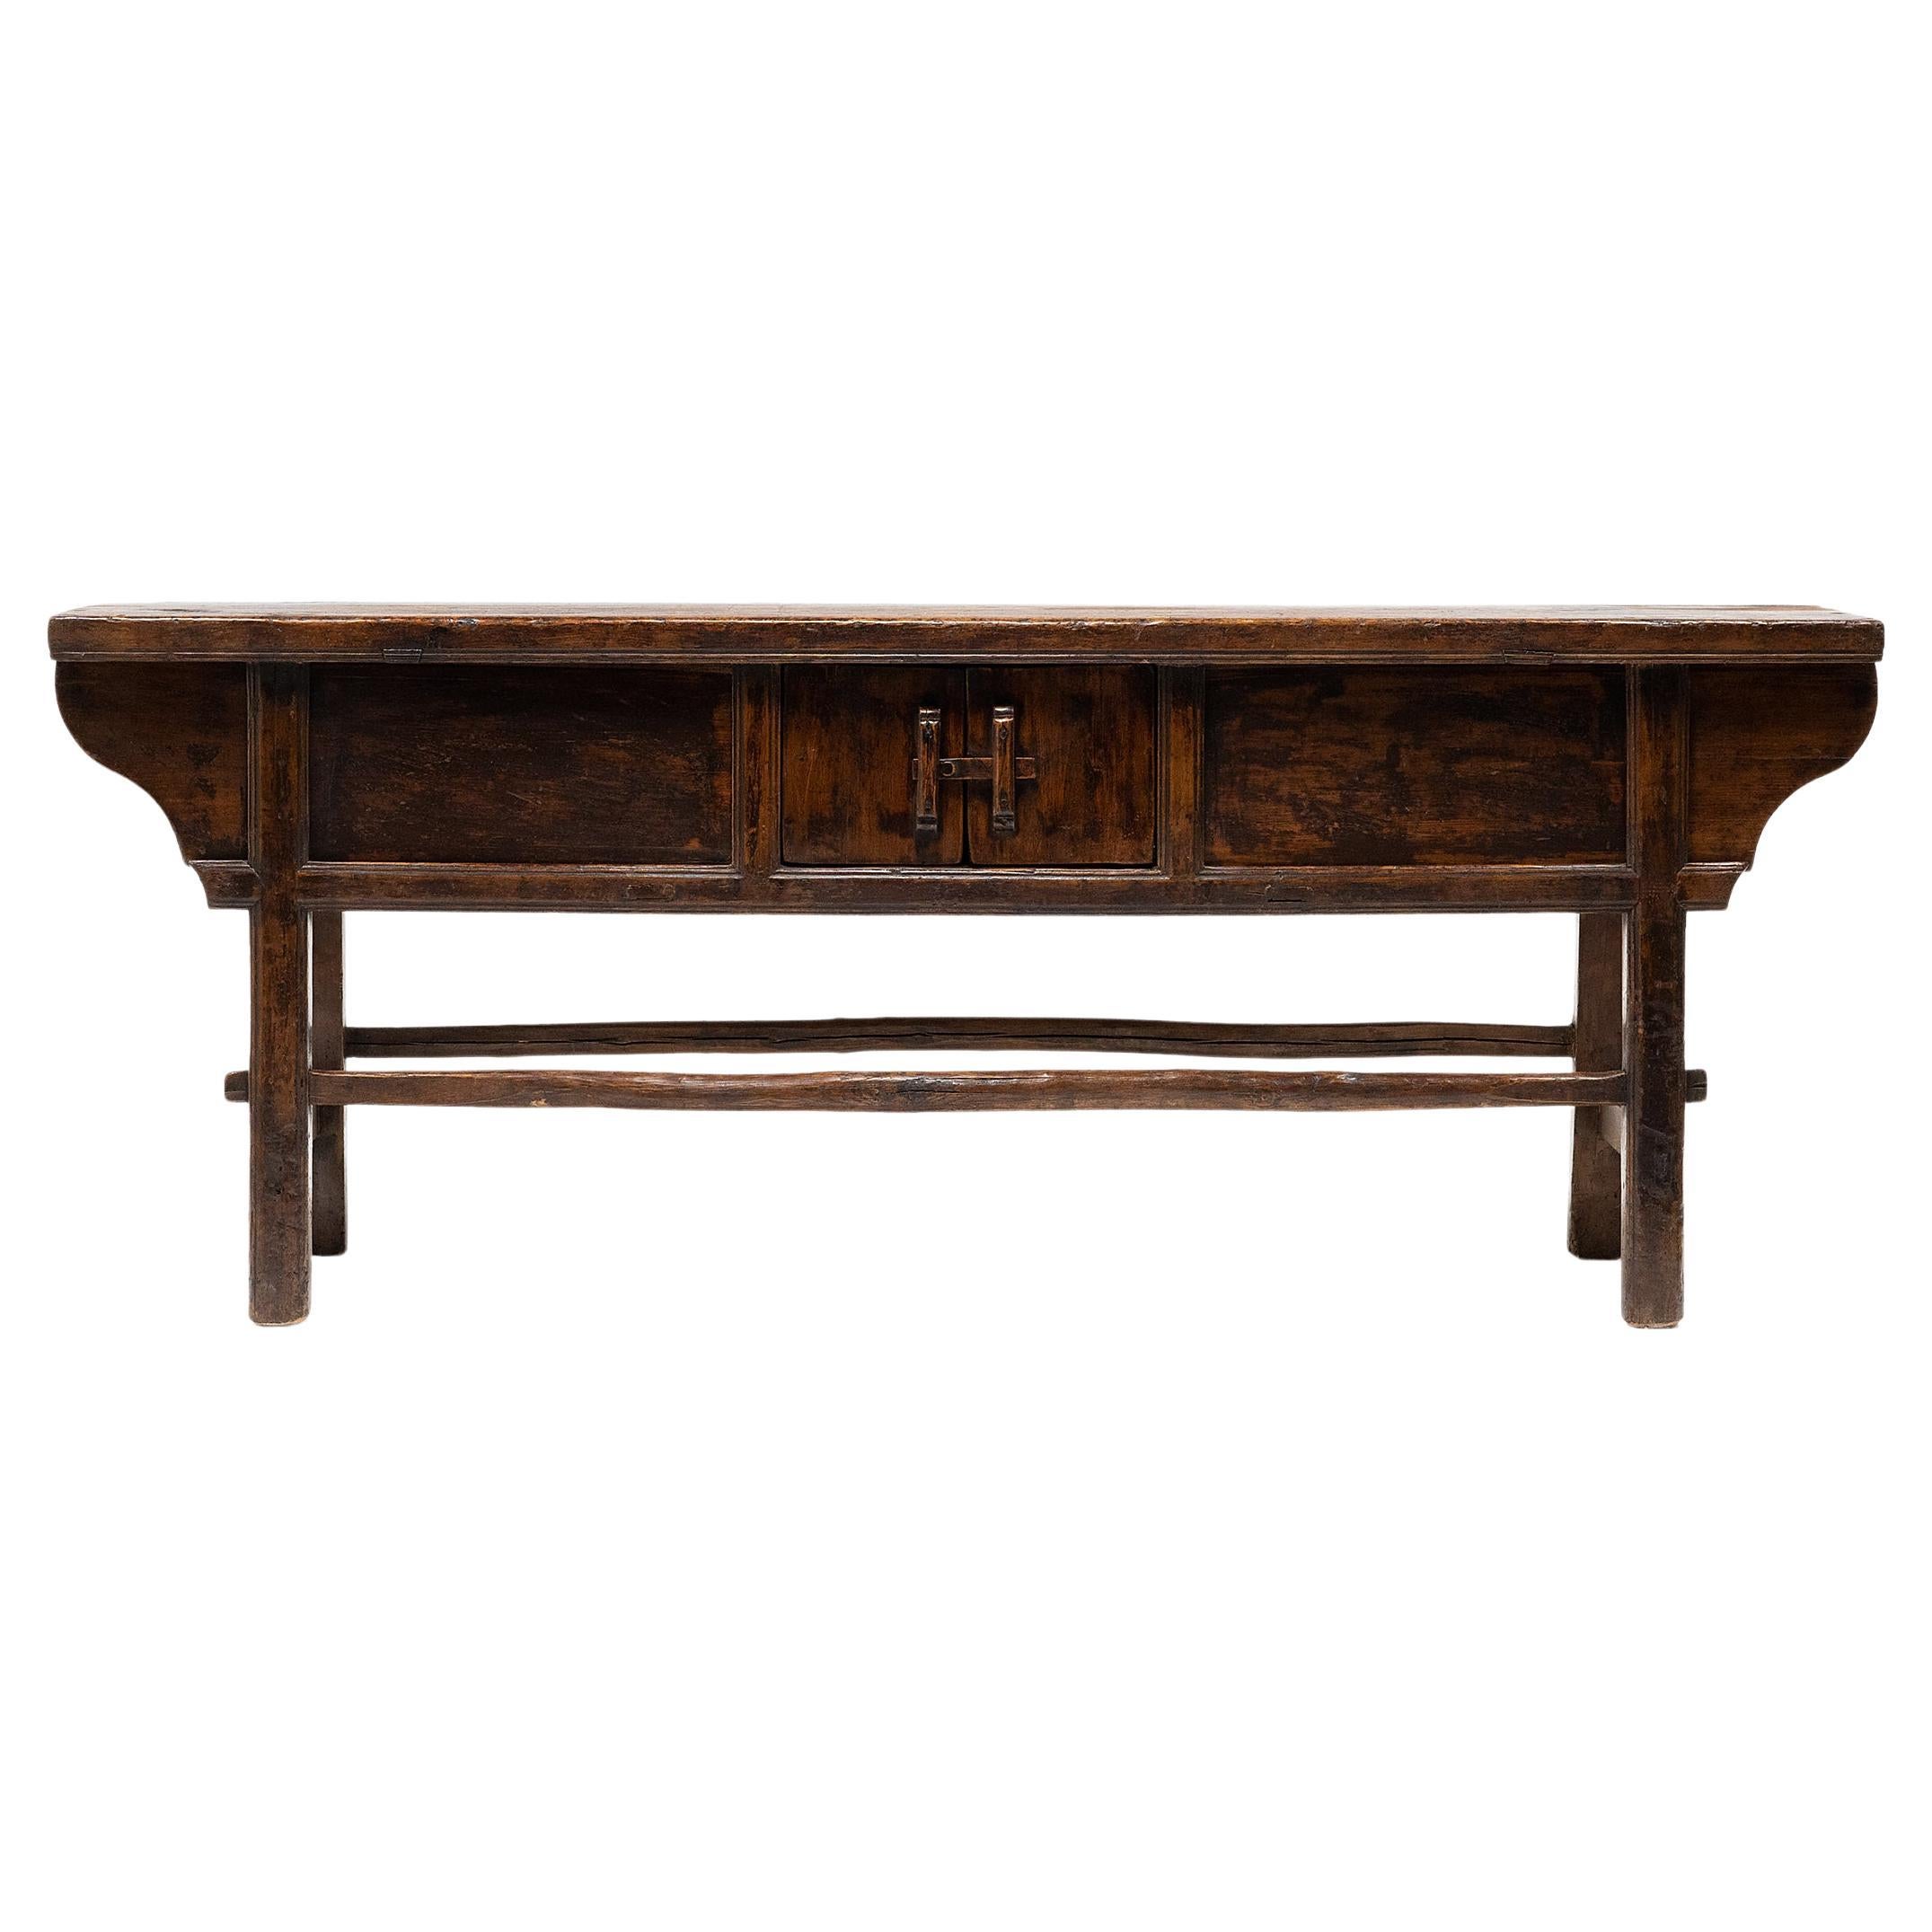 The warm tones and active grain of natural pine wood are the focus of this unusually articulated Dongbei sideboard. Made for a provincial home in northeastern China, this table was once used to honor loved ones past and present with photos or other